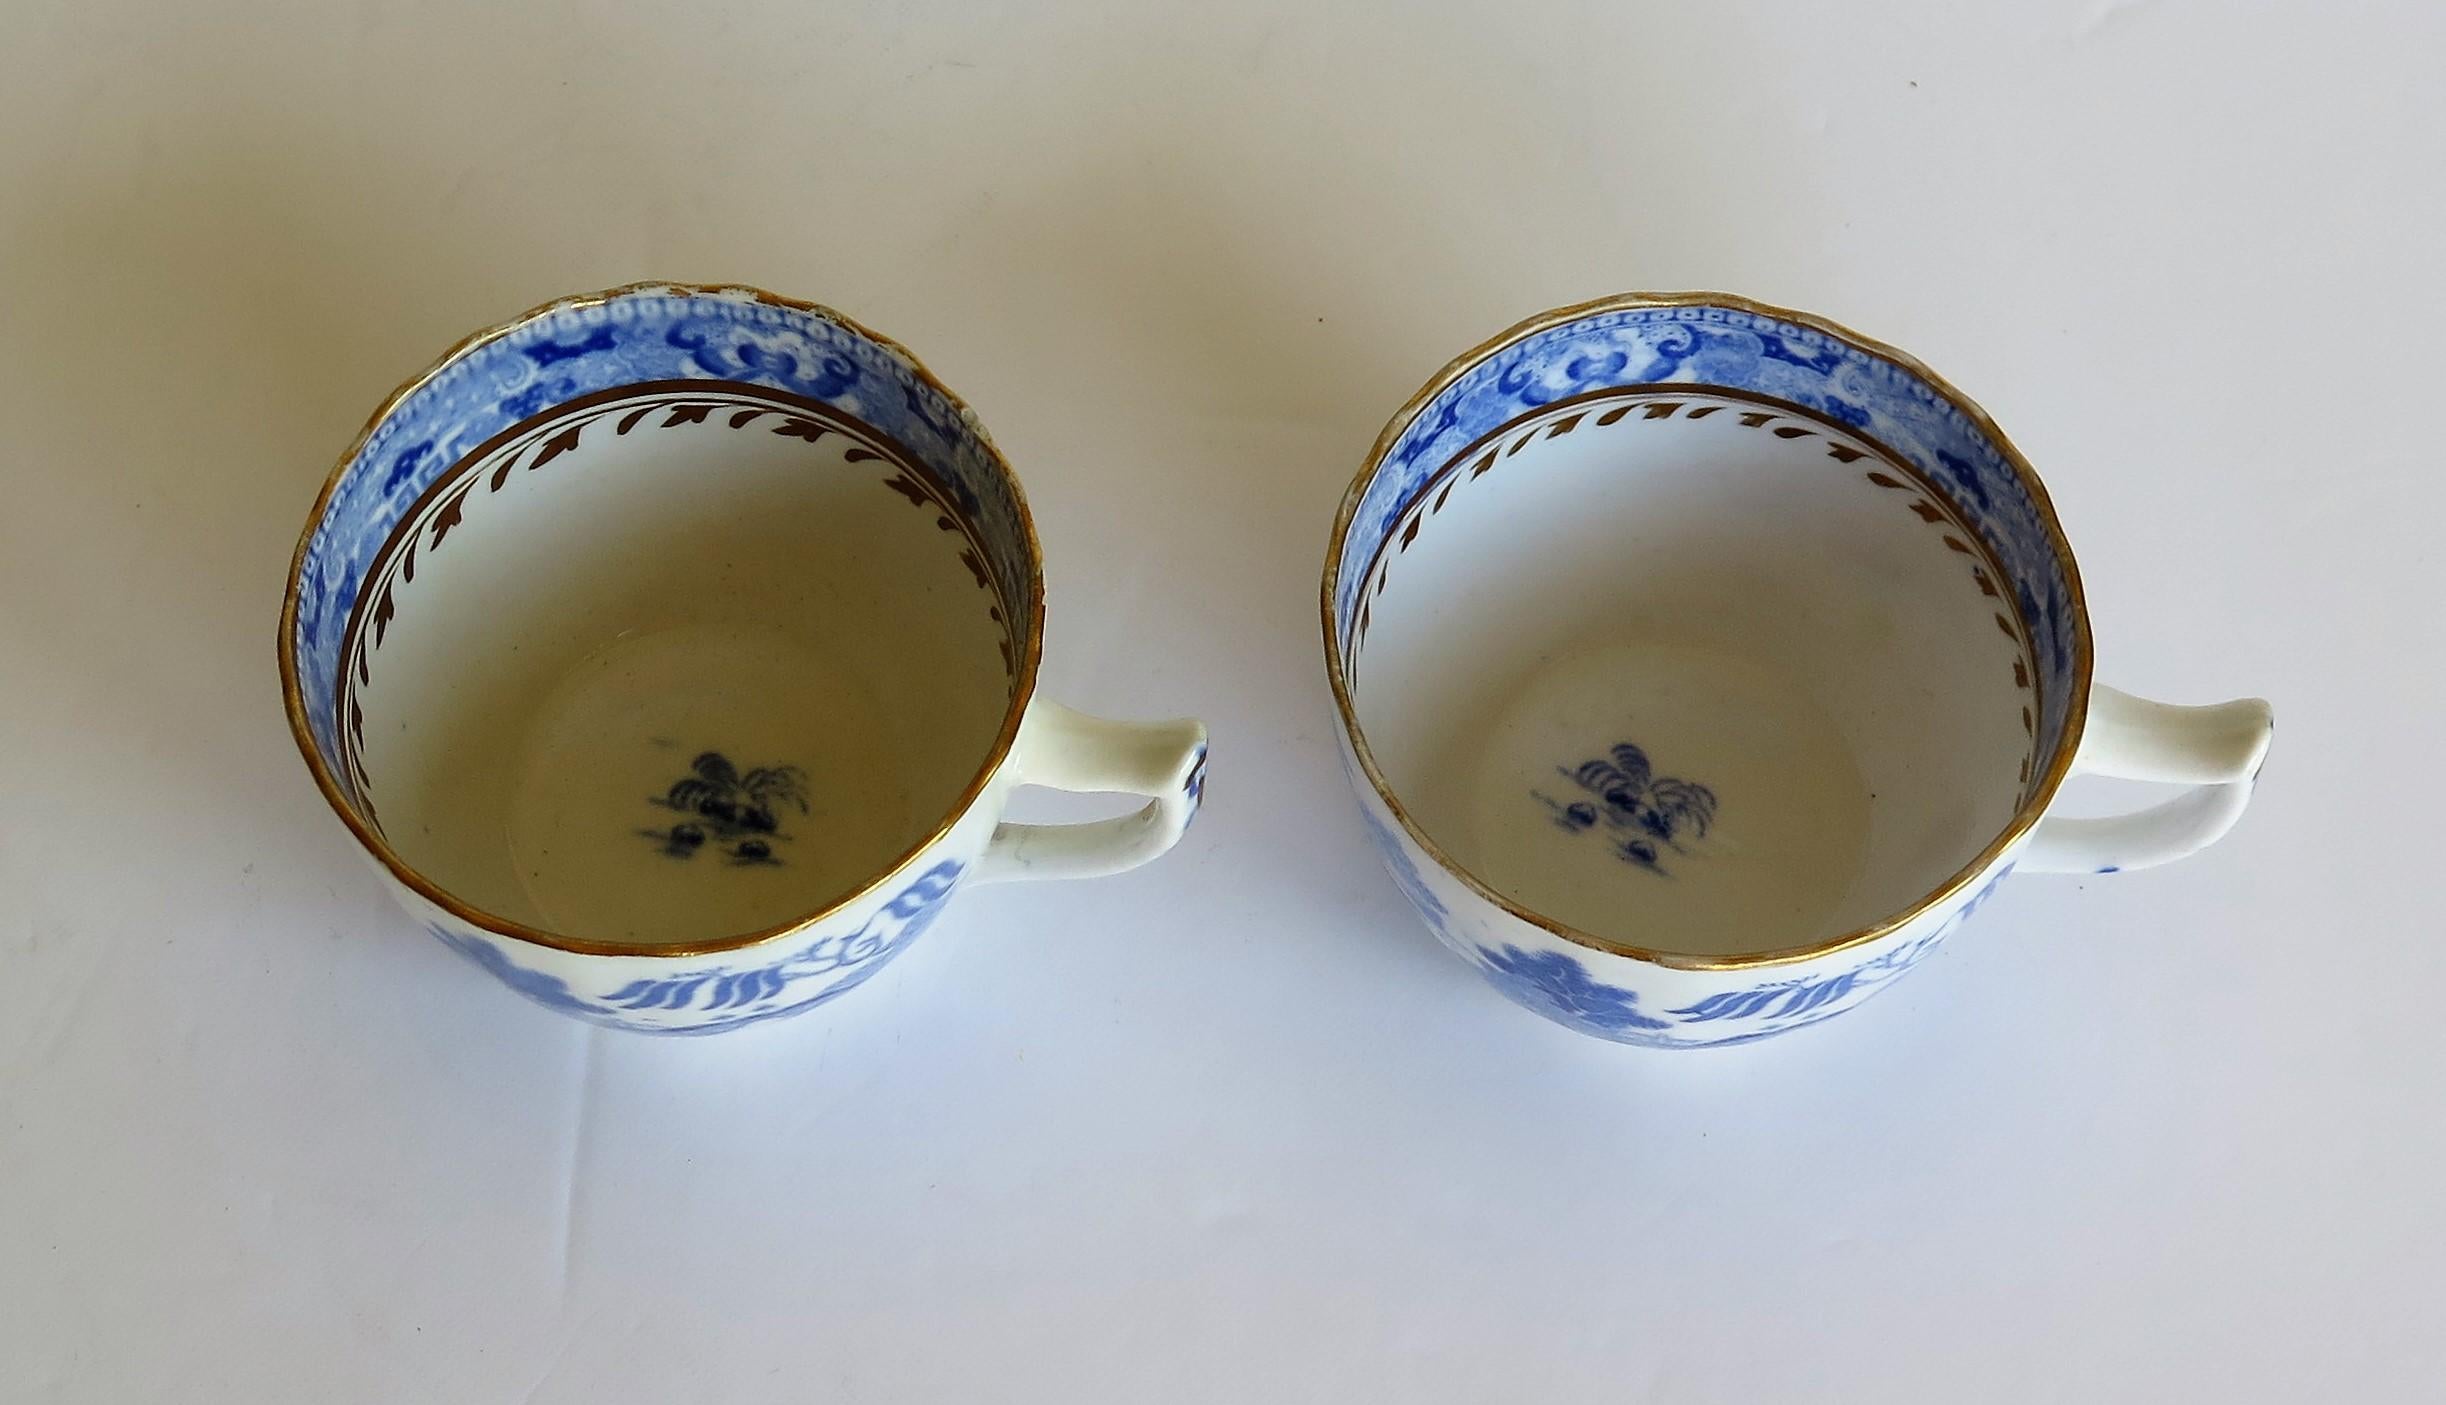 Miles Mason Porcelain Pair of Tea Cups Broseley Blue and White Pattern, Ca. 1805 For Sale 2